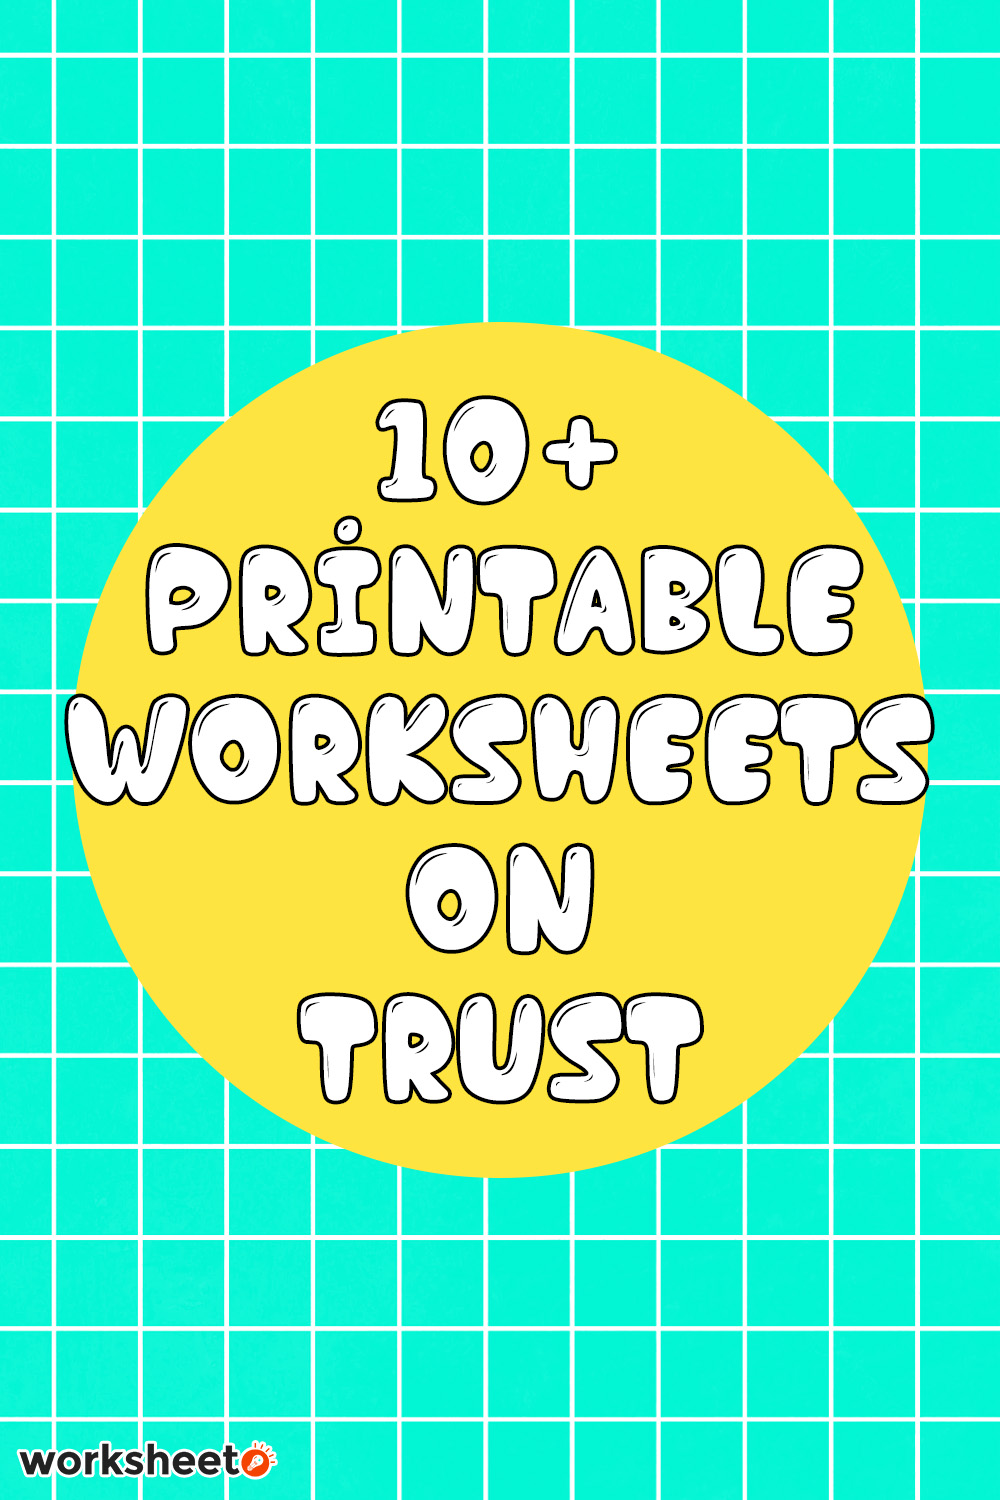 16 Images of Printable Worksheets On Trust